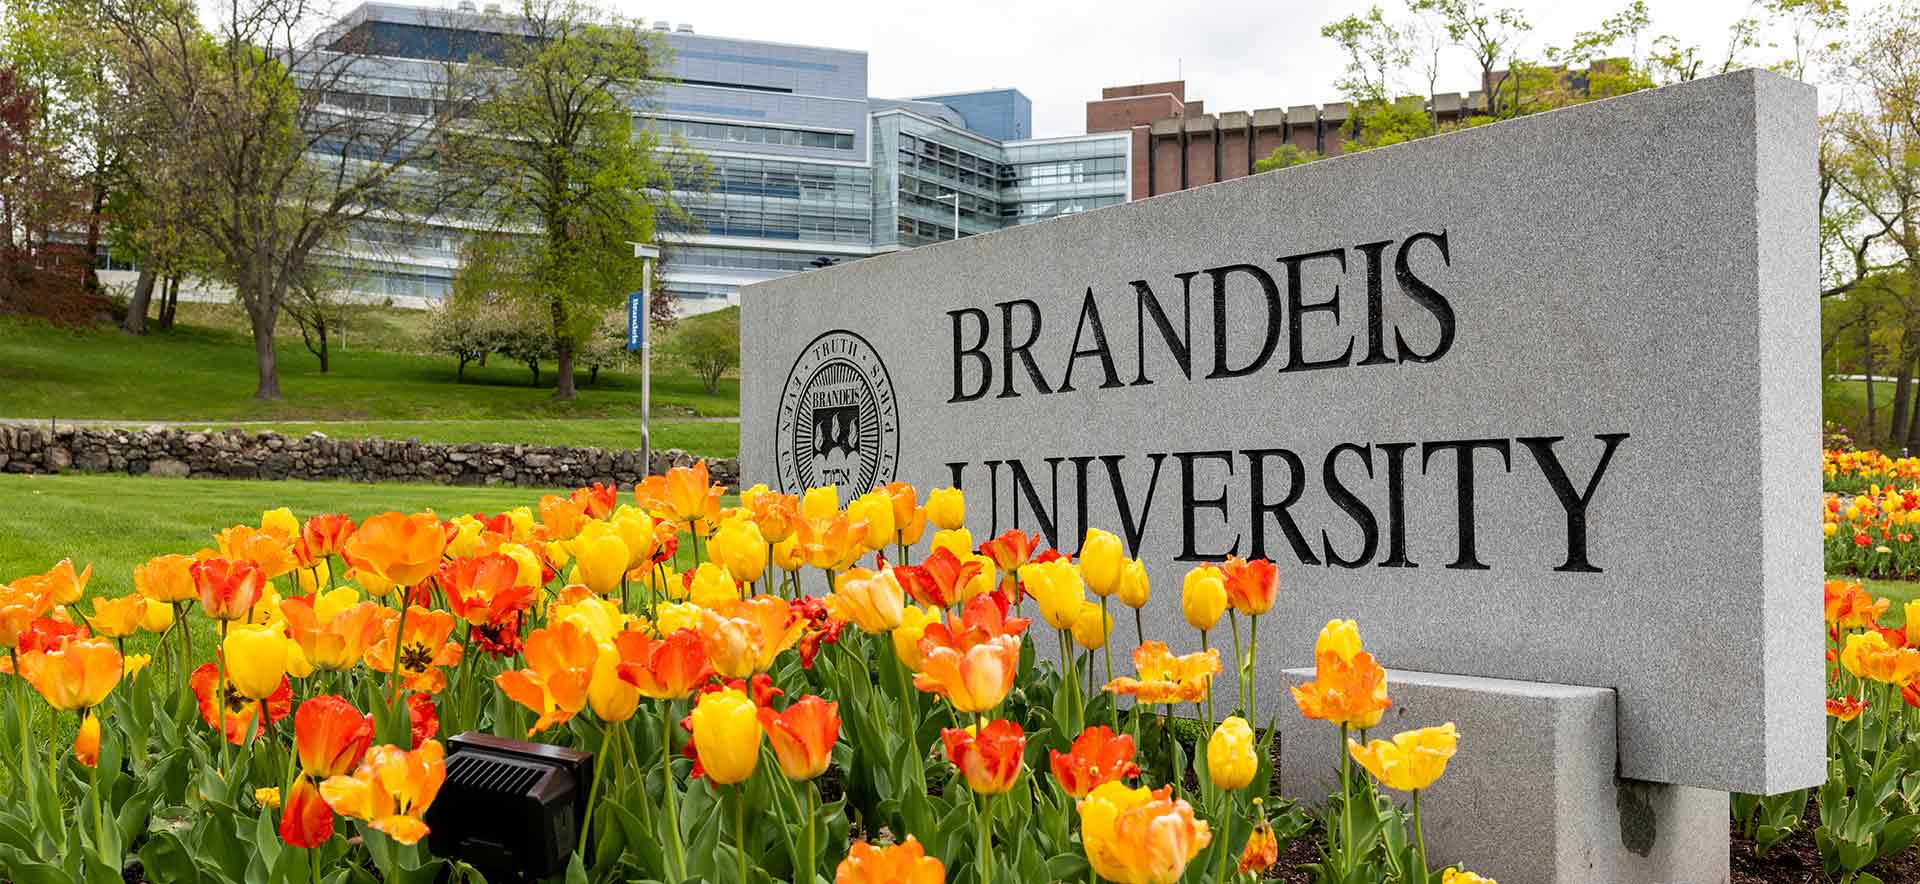 Brandeis University sign at the entrance of campus, brightly colored tulips are in the foreground